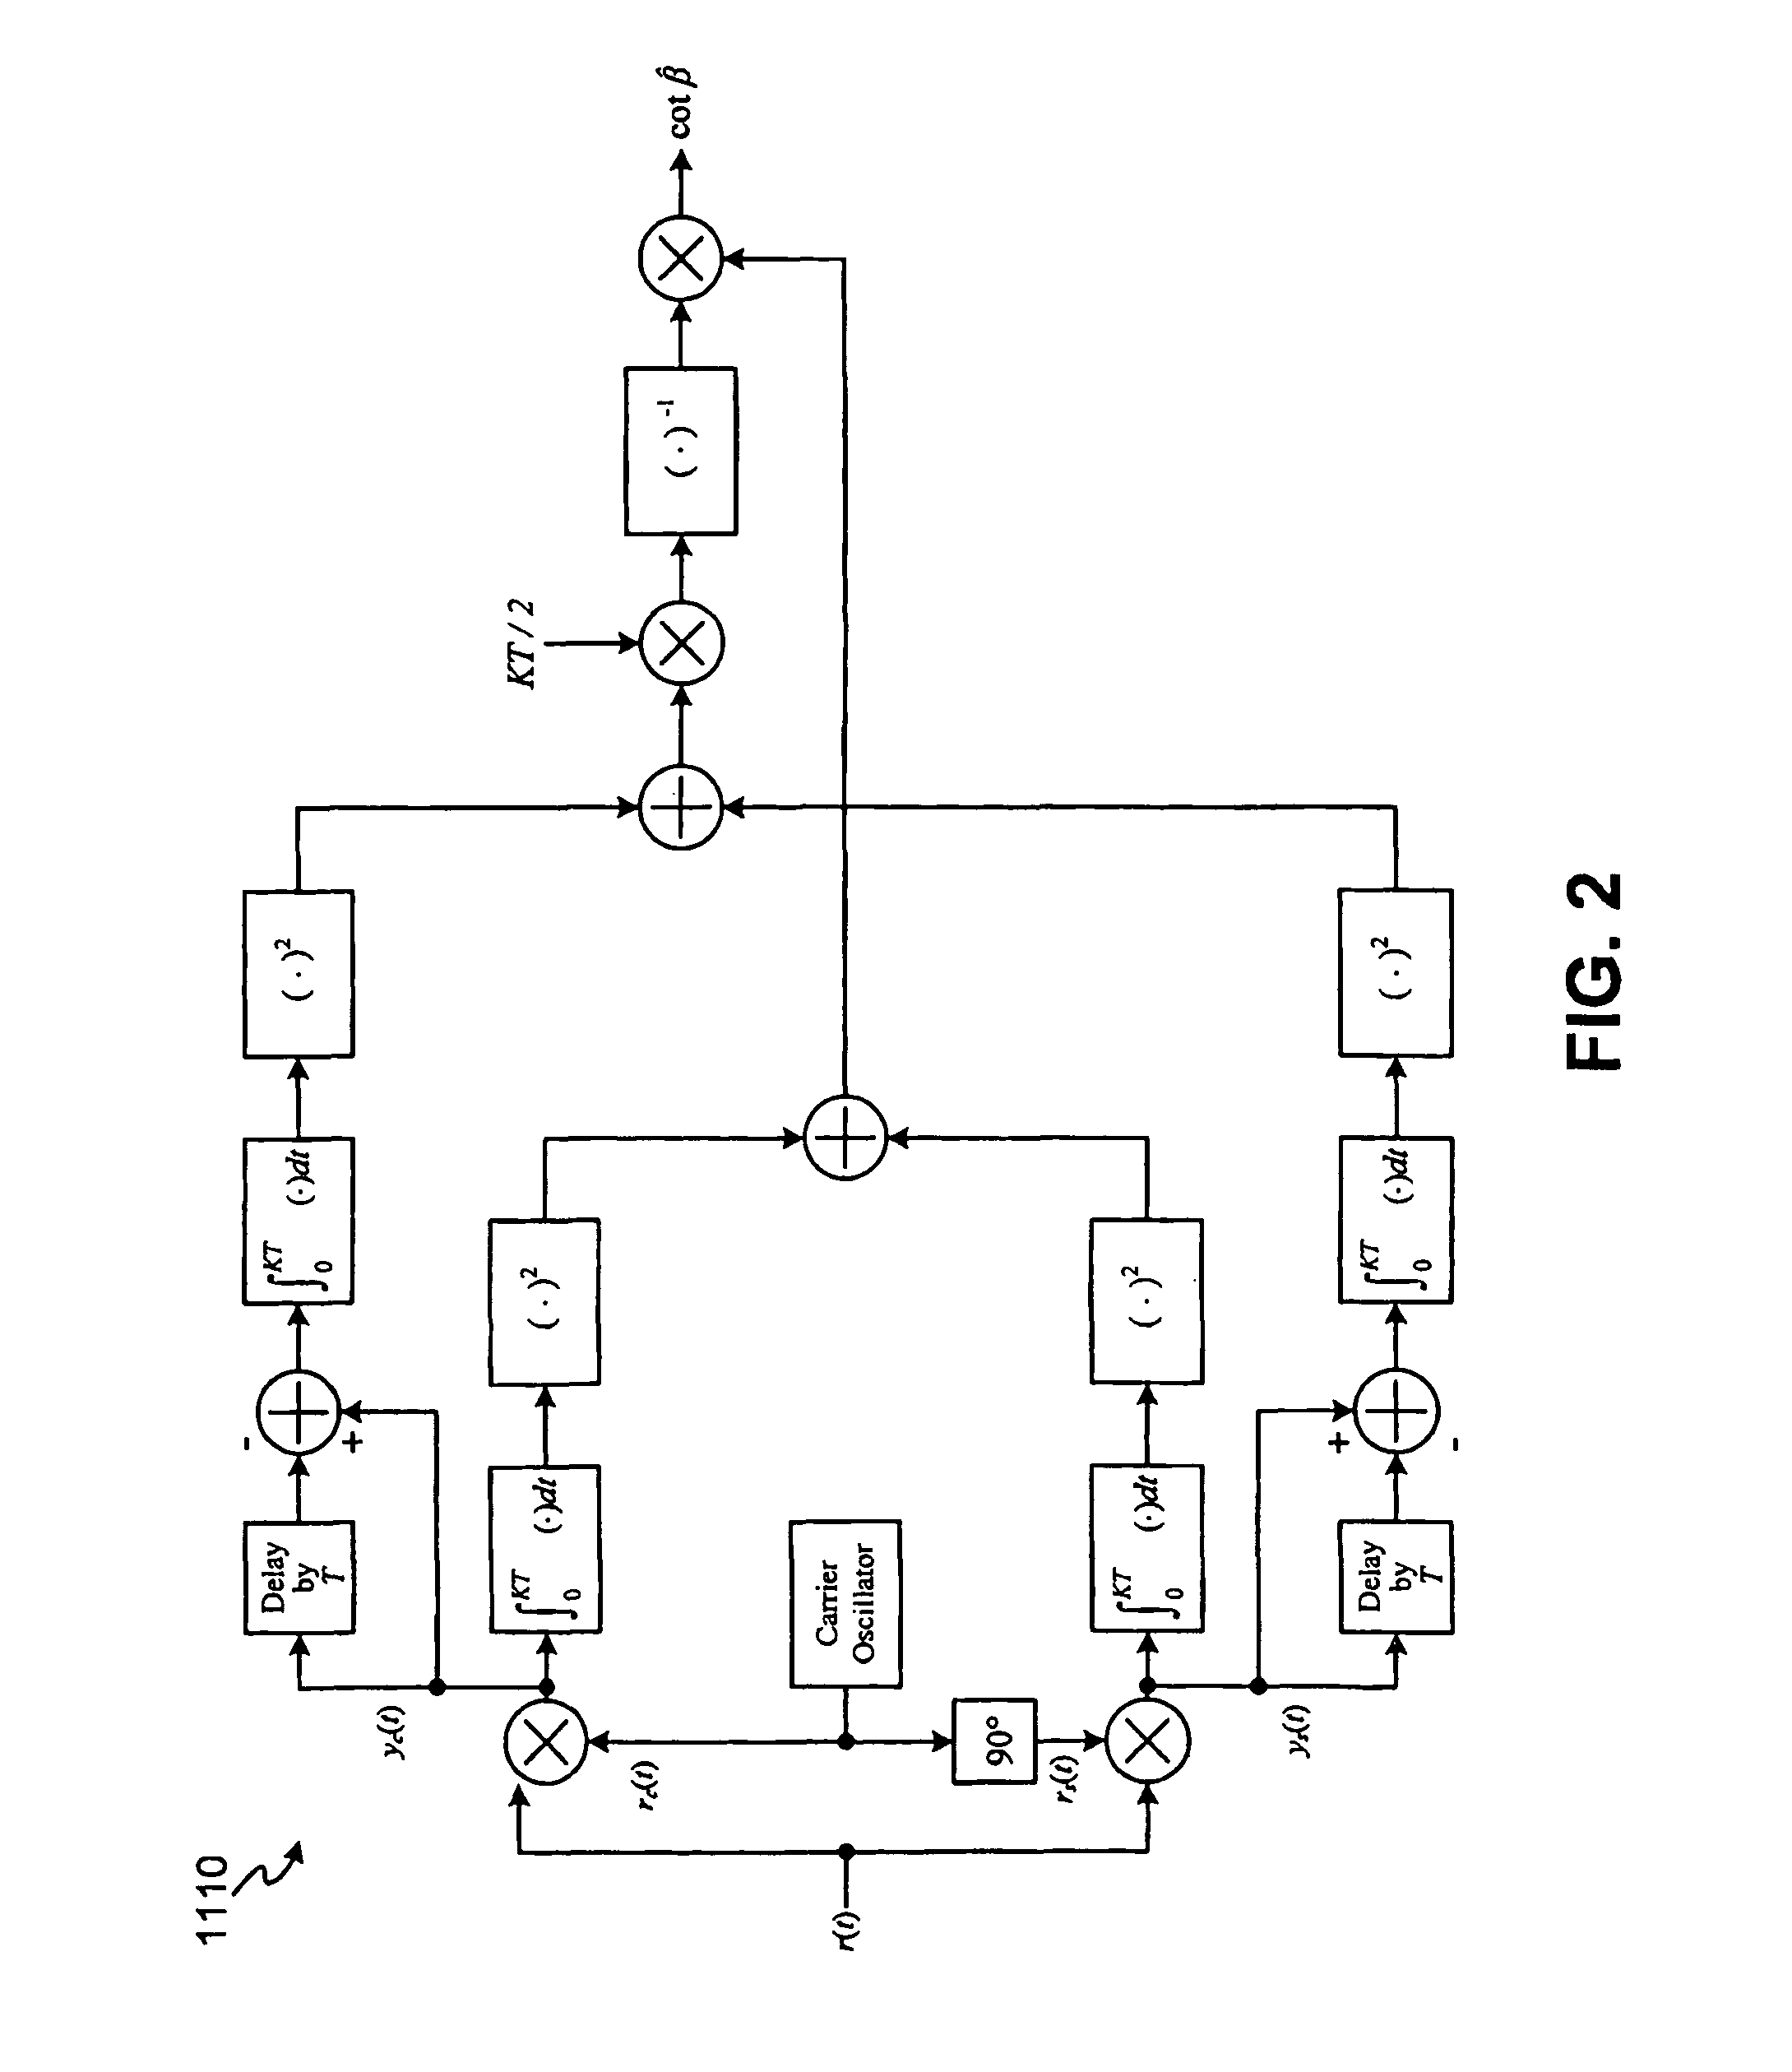 Self-configurable radio receiver system and method for use with signals without prior knowledge of signal defining characteristics